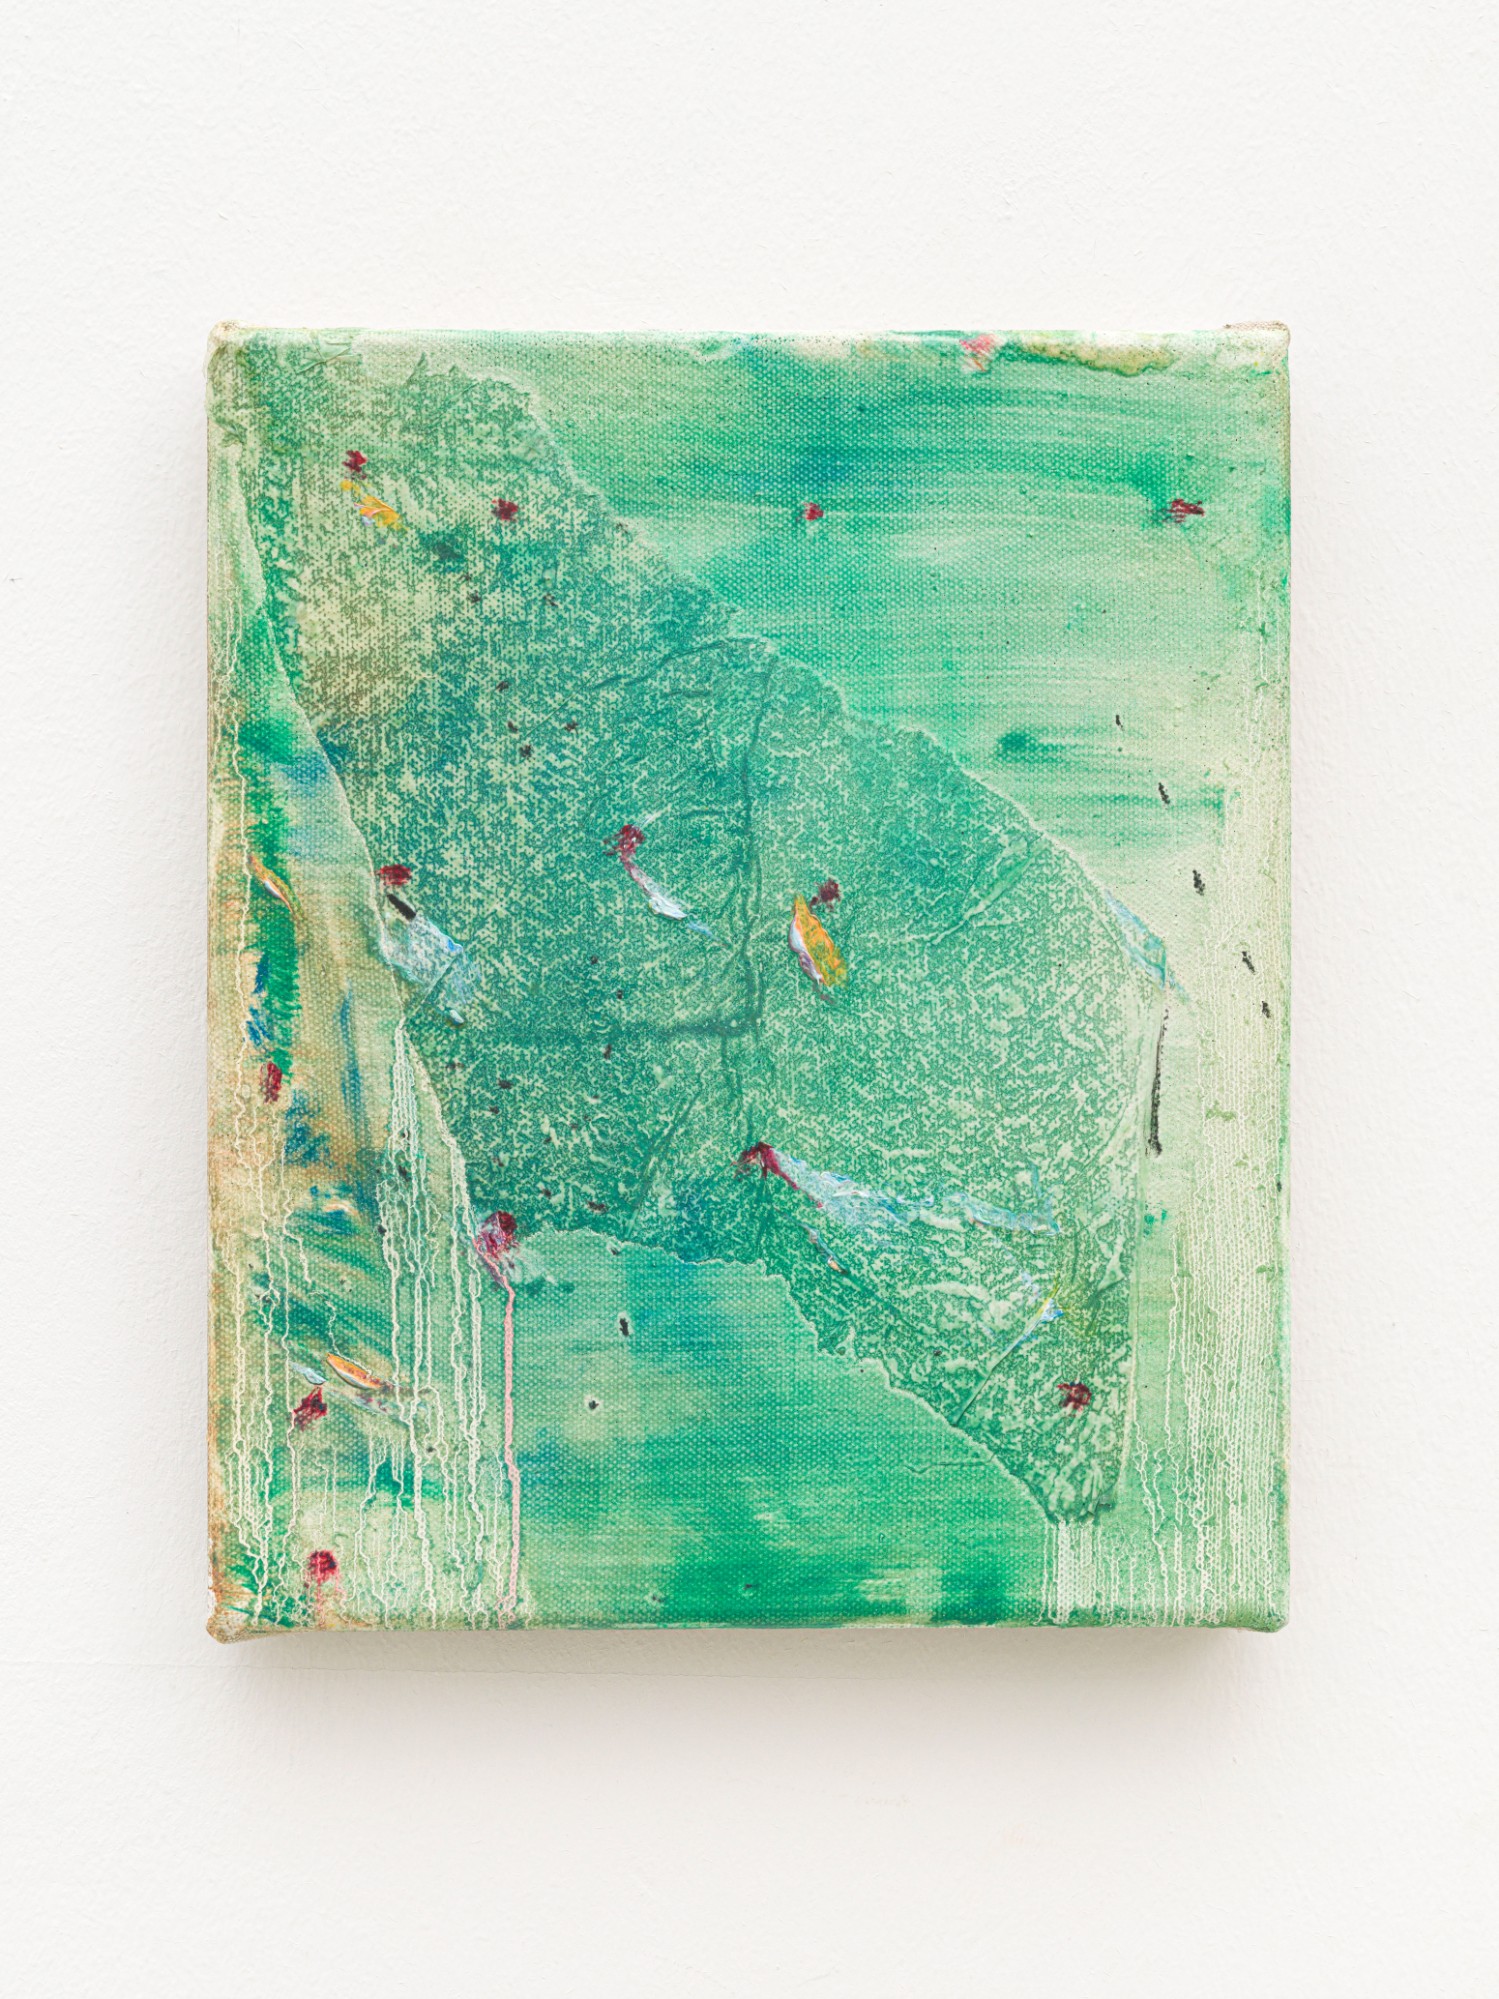 Hinako Miyabayashi, A Carpet Found by Crows, 2023, oil and paper (tissue paper) on canvas, 30 x 25 cm